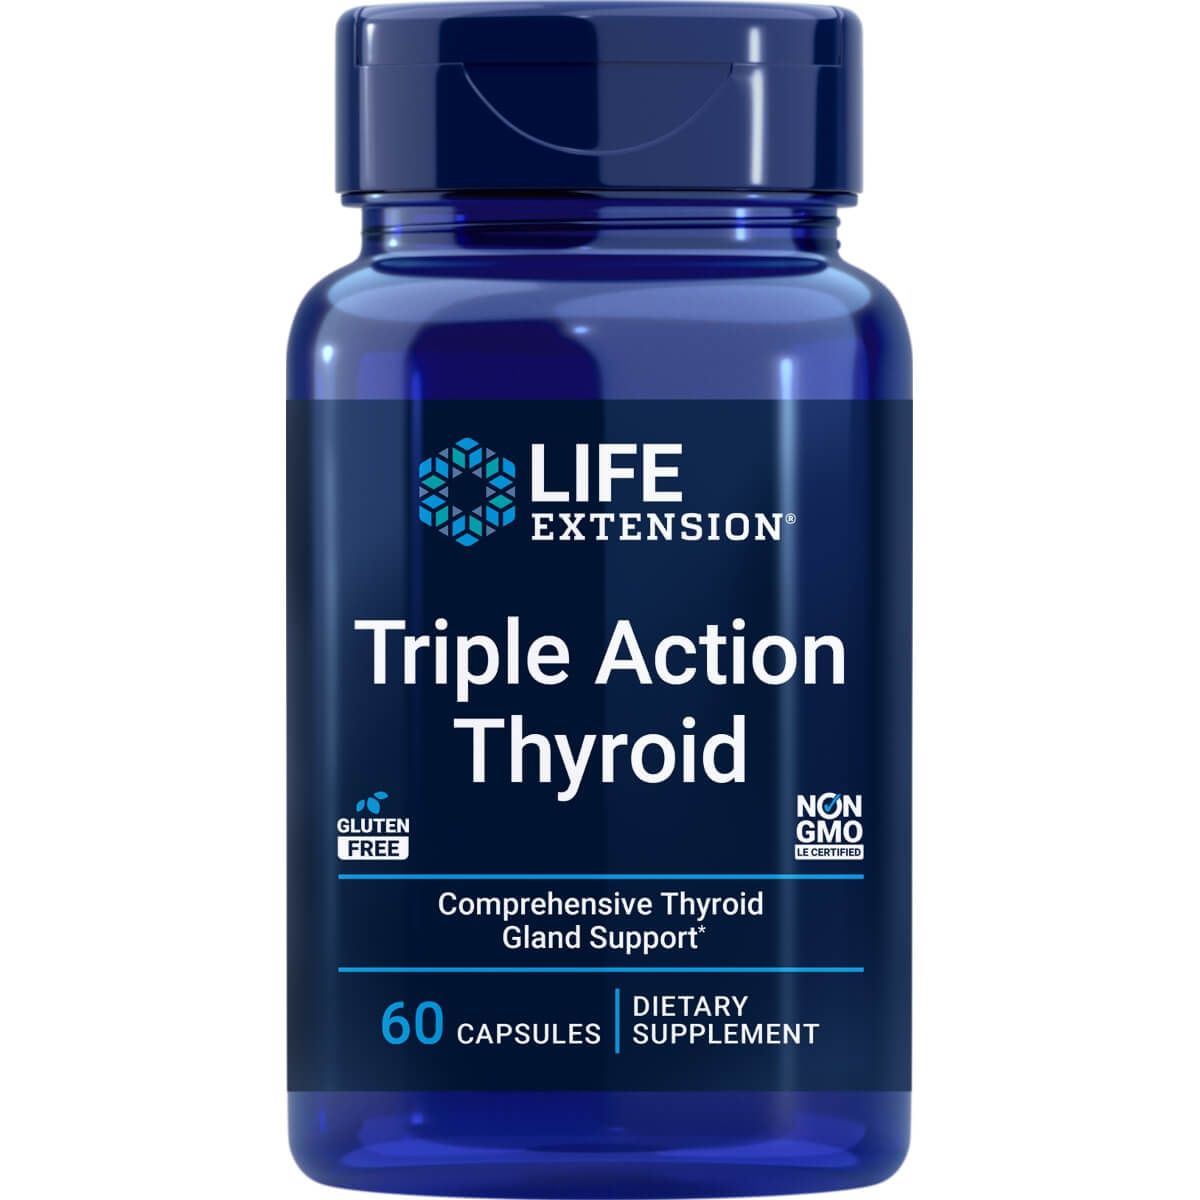 Photos - Vitamins & Minerals Life Extension Triple Action Thyroid 60 Capsules PBW-P32915 